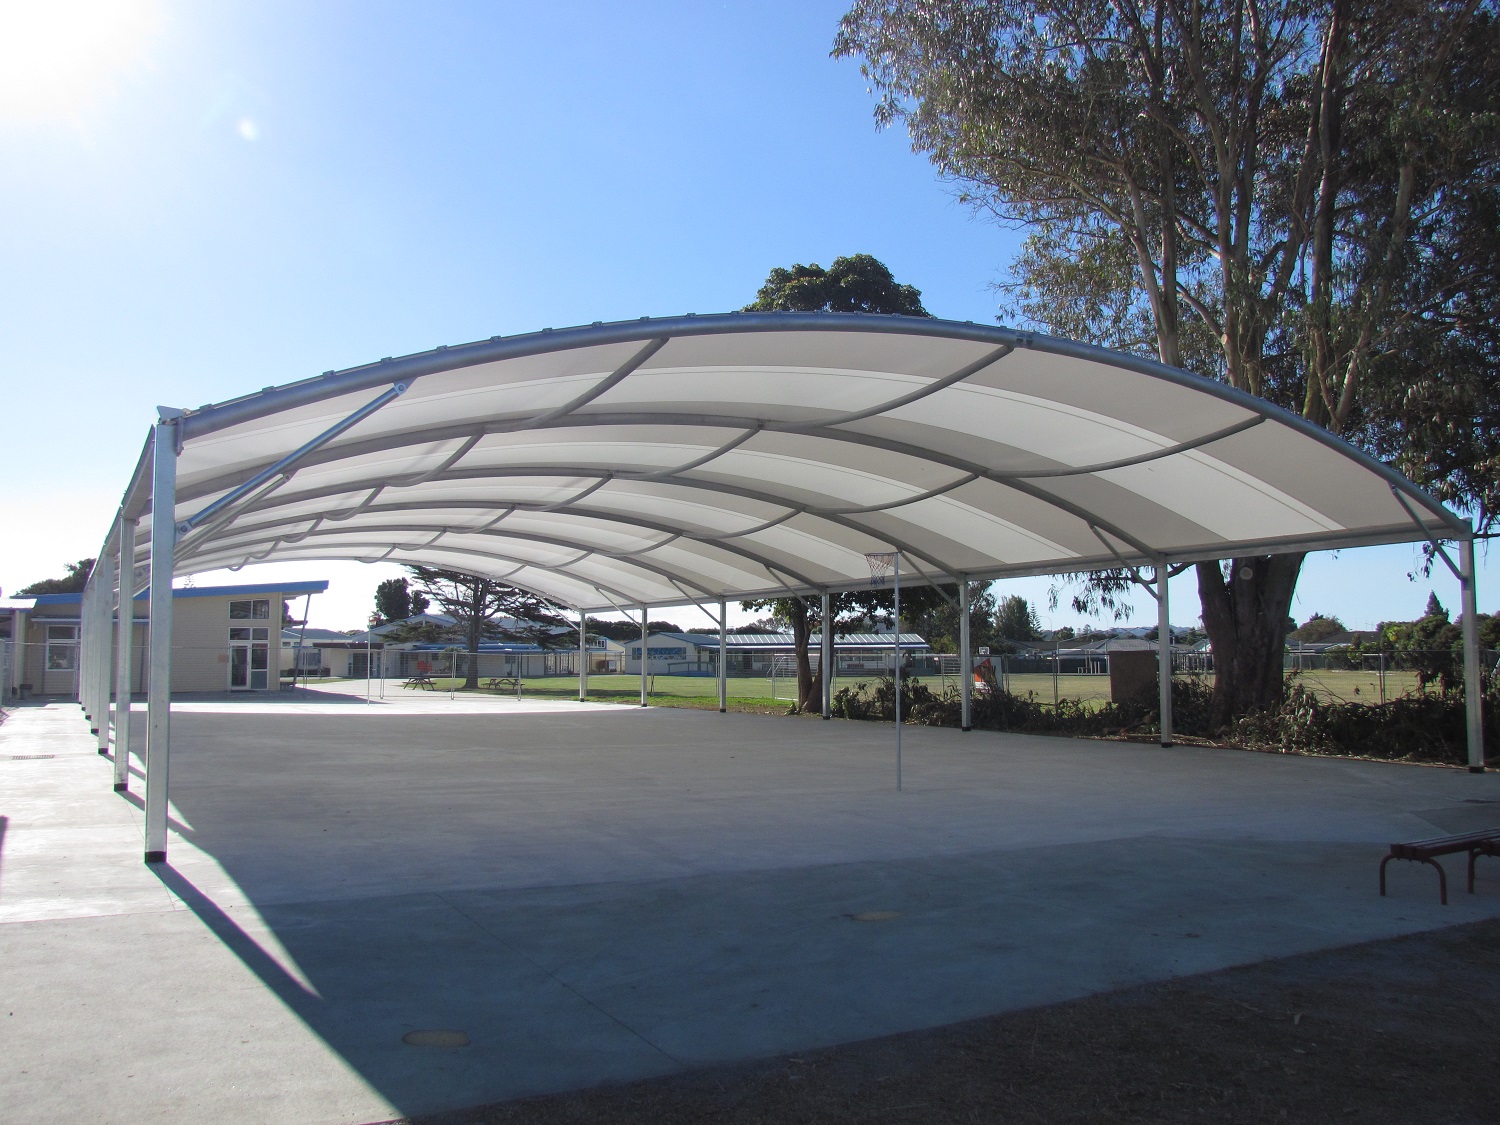 Covered outdoor learning areas